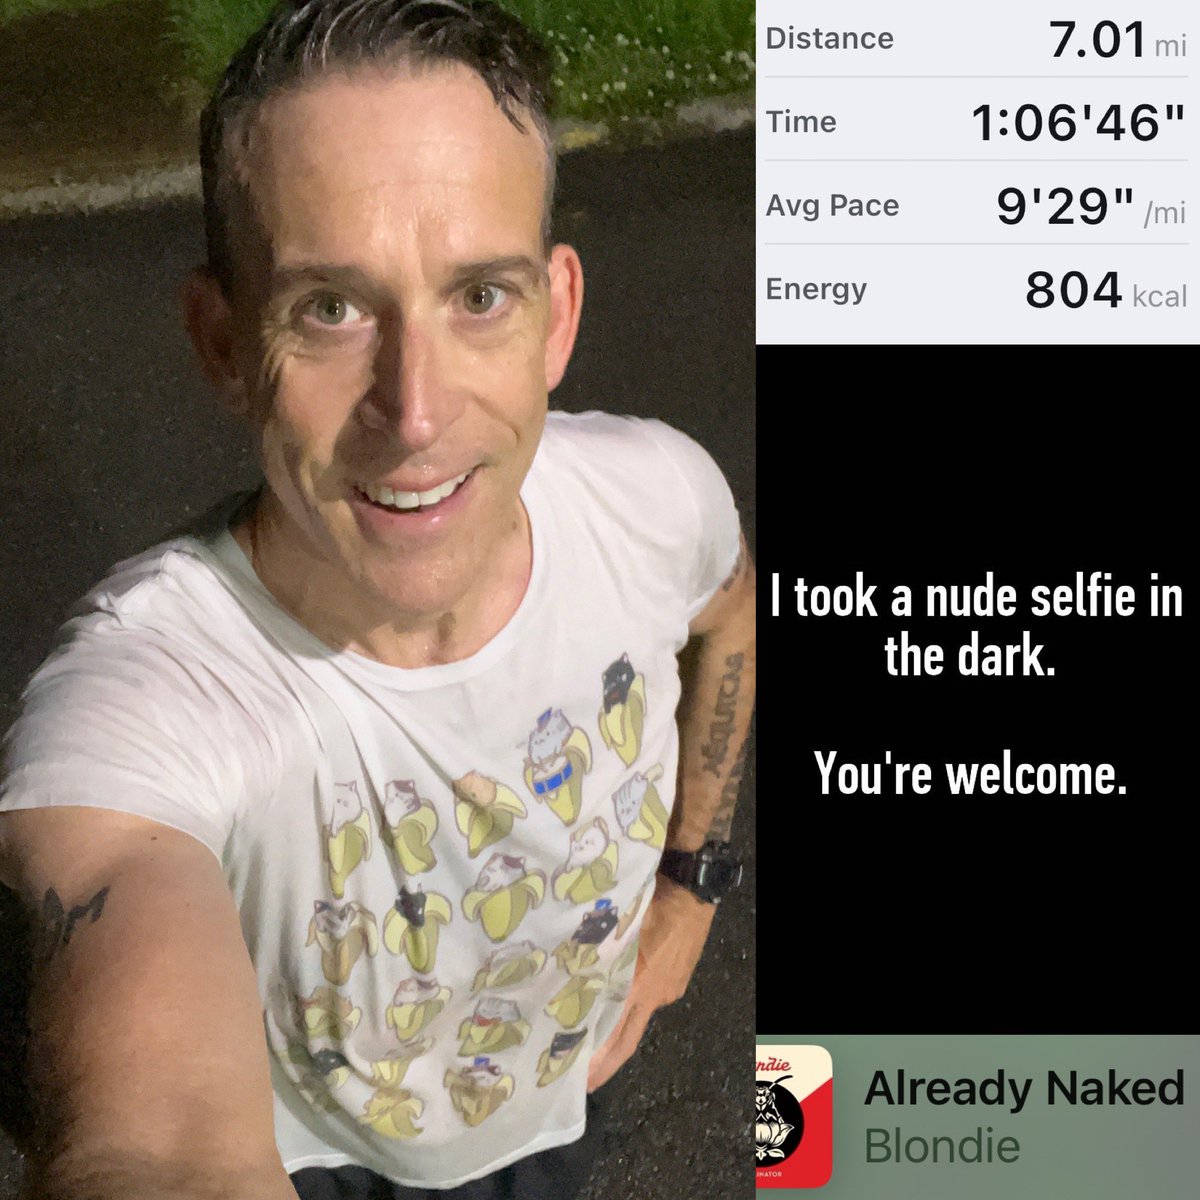 Forgot to check the forecast, got hit with a wonderful downpour halfway through. I f’ing love running in the rain. #runintherain #runningintherain #figleaf5k #bananas #runningafter50